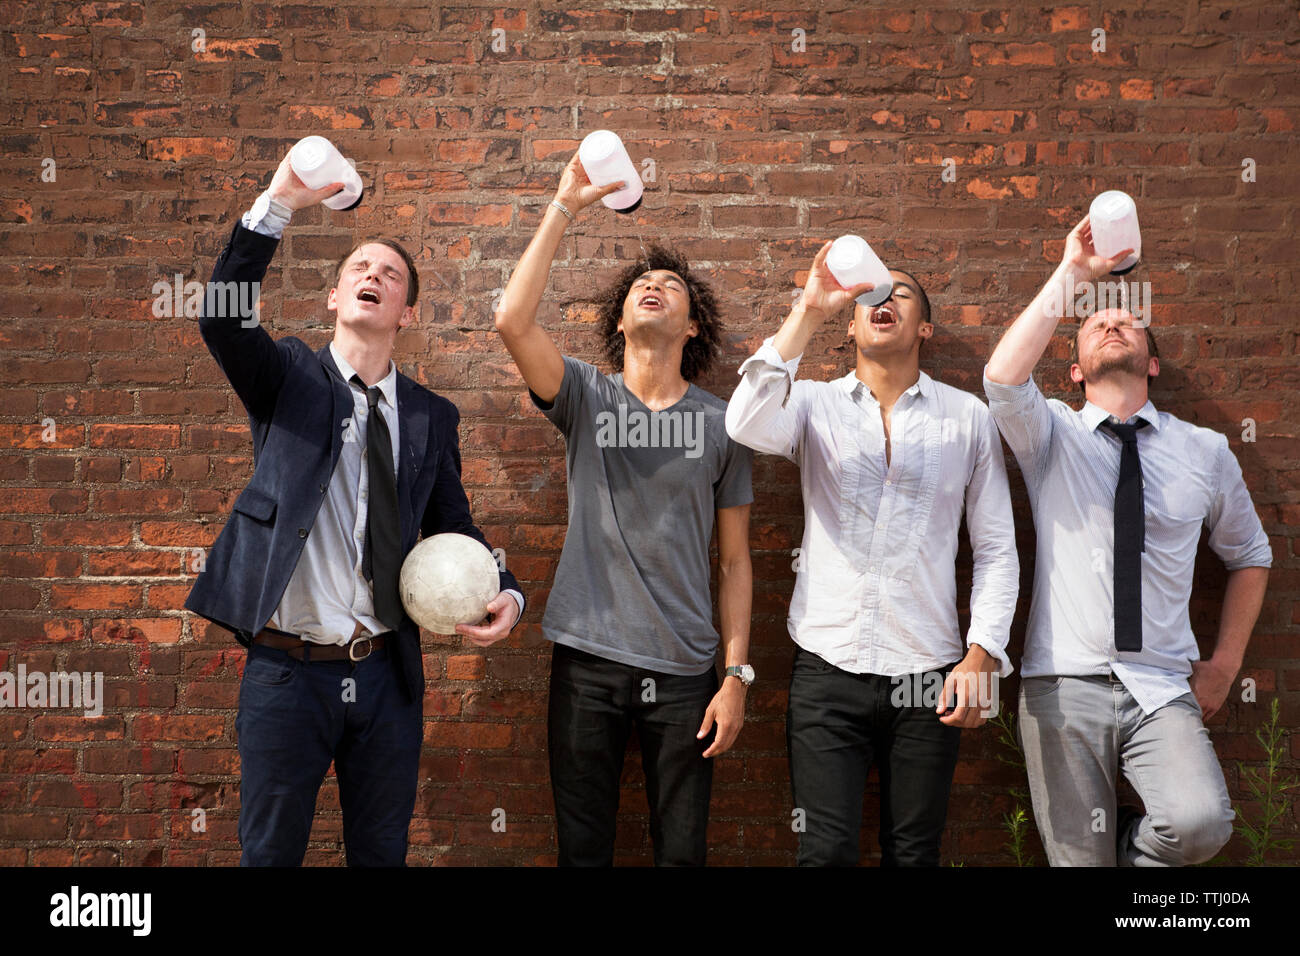 Friends drinking water while standing against brick wall Stock Photo